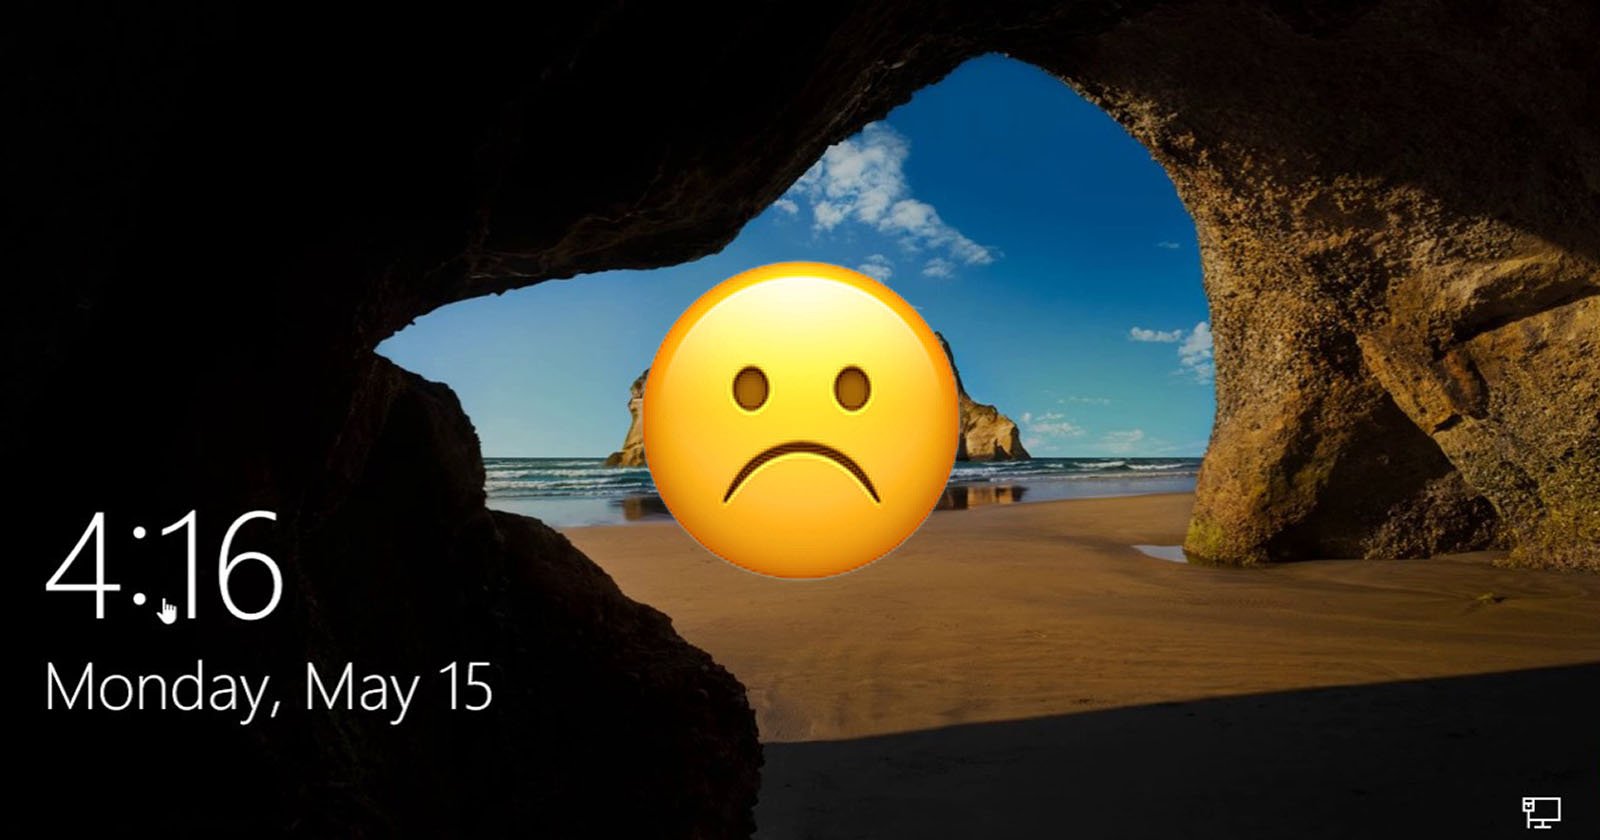 Photographers Peeved Their Photos Were Quietly Used In Windows 10 Images, Photos, Reviews